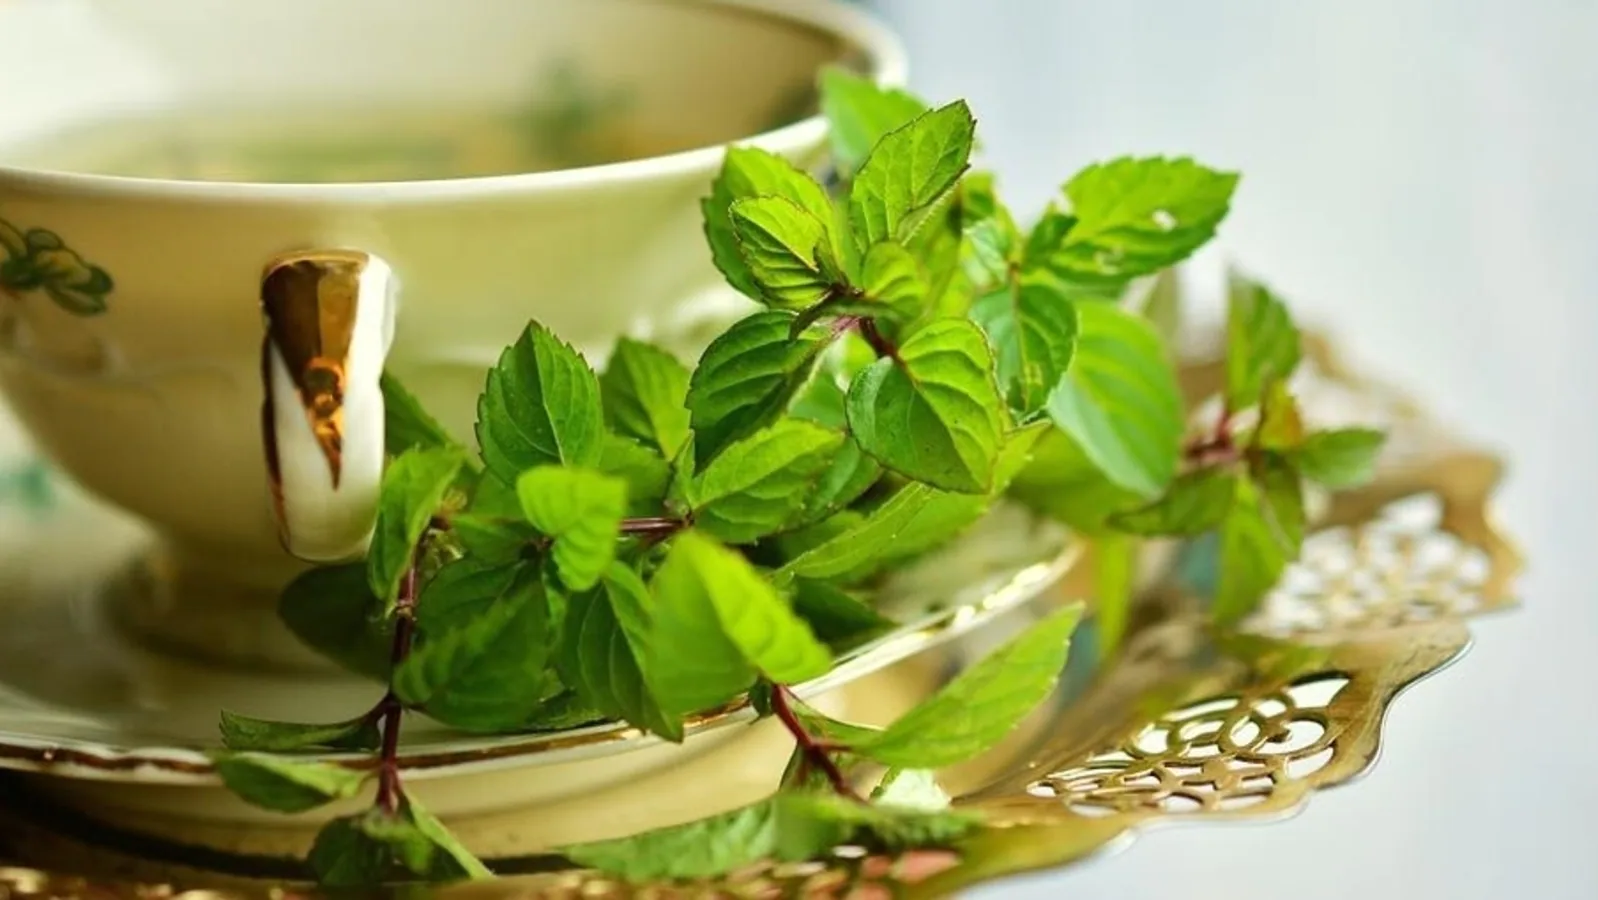 Drink mint tea to beat acidity and summer lethargy; know all the health benefits